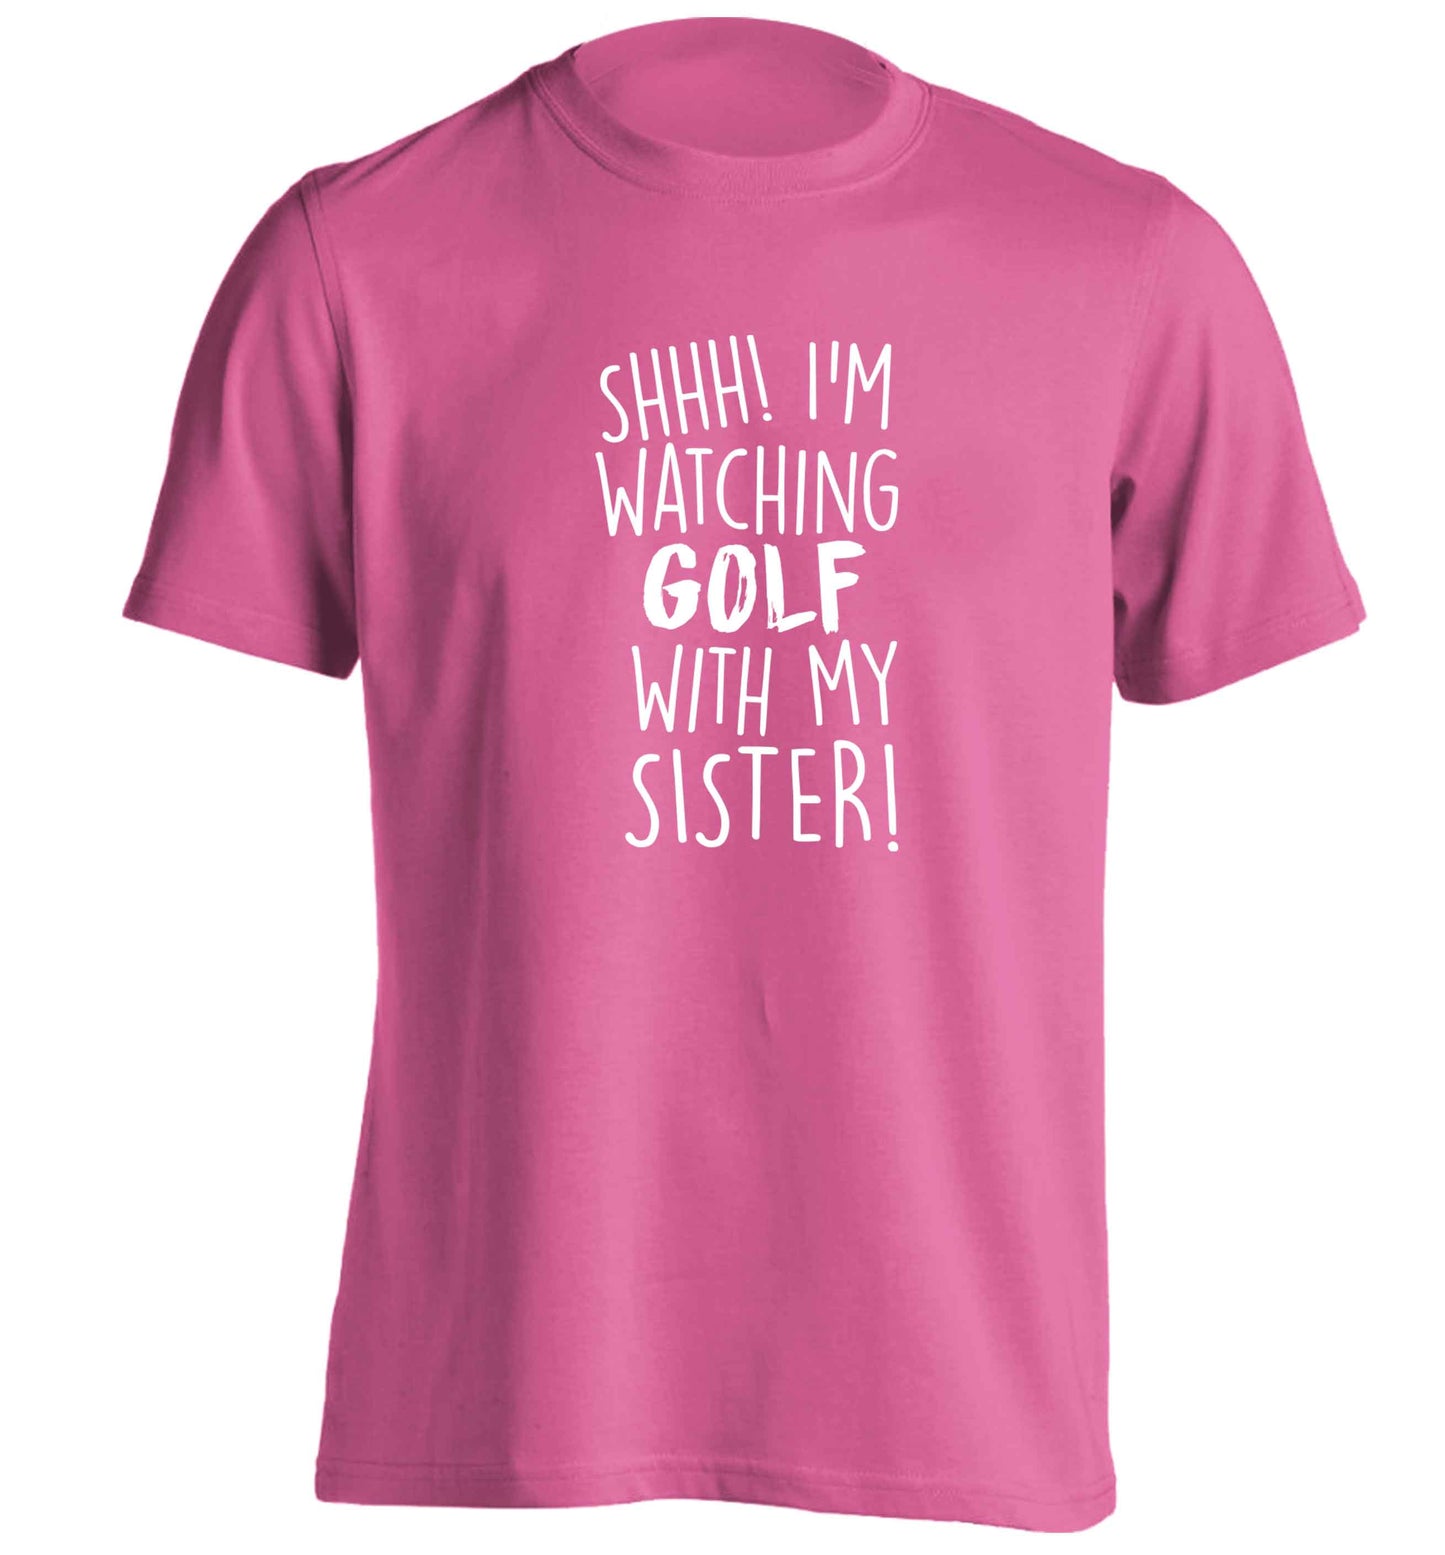 Shh I'm watching golf with my sister adults unisex pink Tshirt 2XL